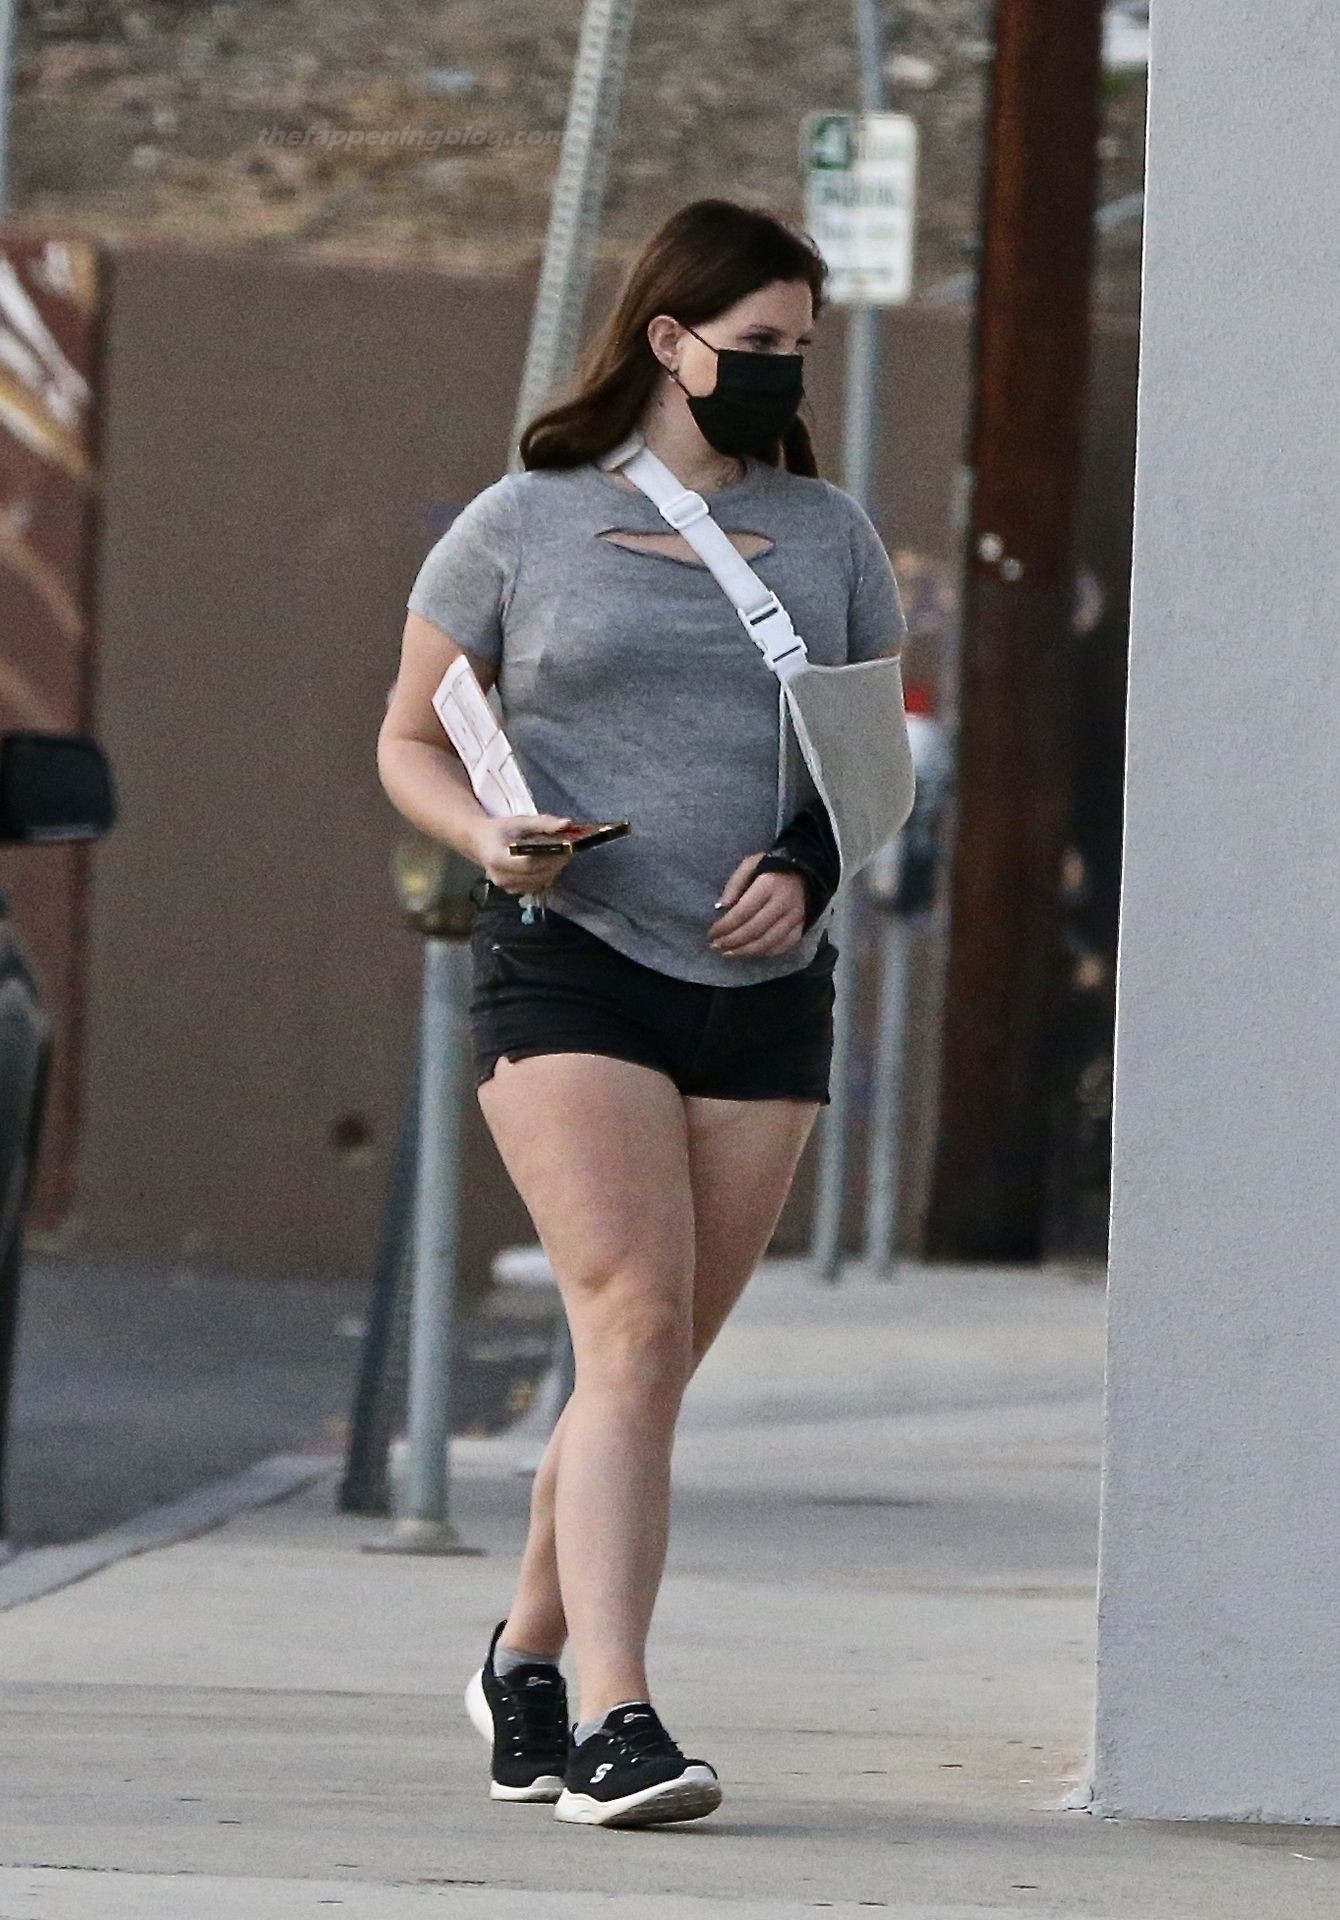 Leggy Lana Del Rey Gets Tacos Before Heading to the Clinic (23 Photos)